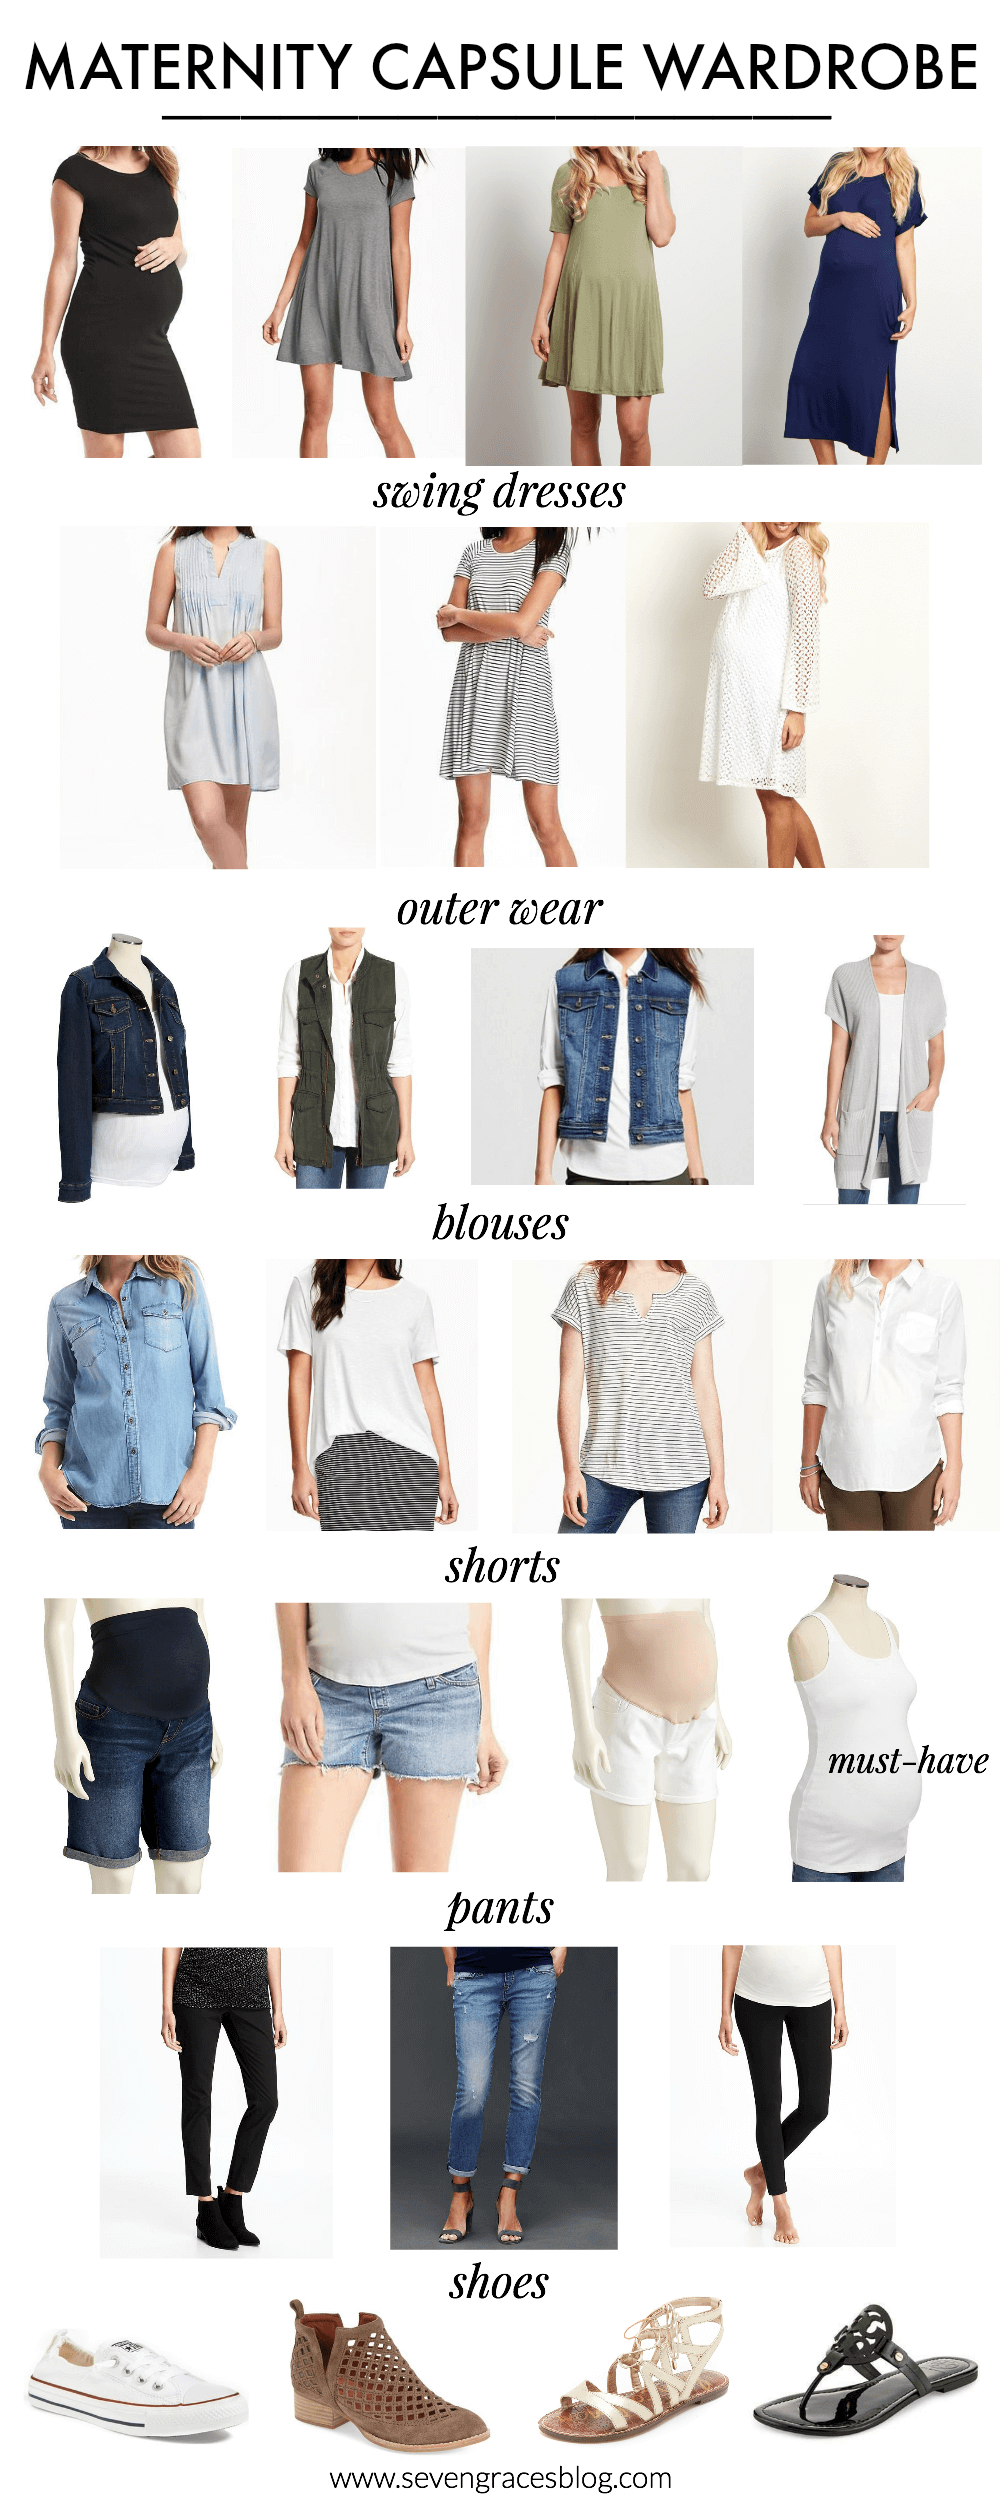 The ultimate maternity capsule wardrobe! This maternity capsule wardrobe walks the expectant mama through what she'll need to wear to create countless outfits for almost any season. Timeless pieces that will take you from the first trimester to postpartum days. This makes dressing the baby bump so easy. These pieces are the only you'll need!